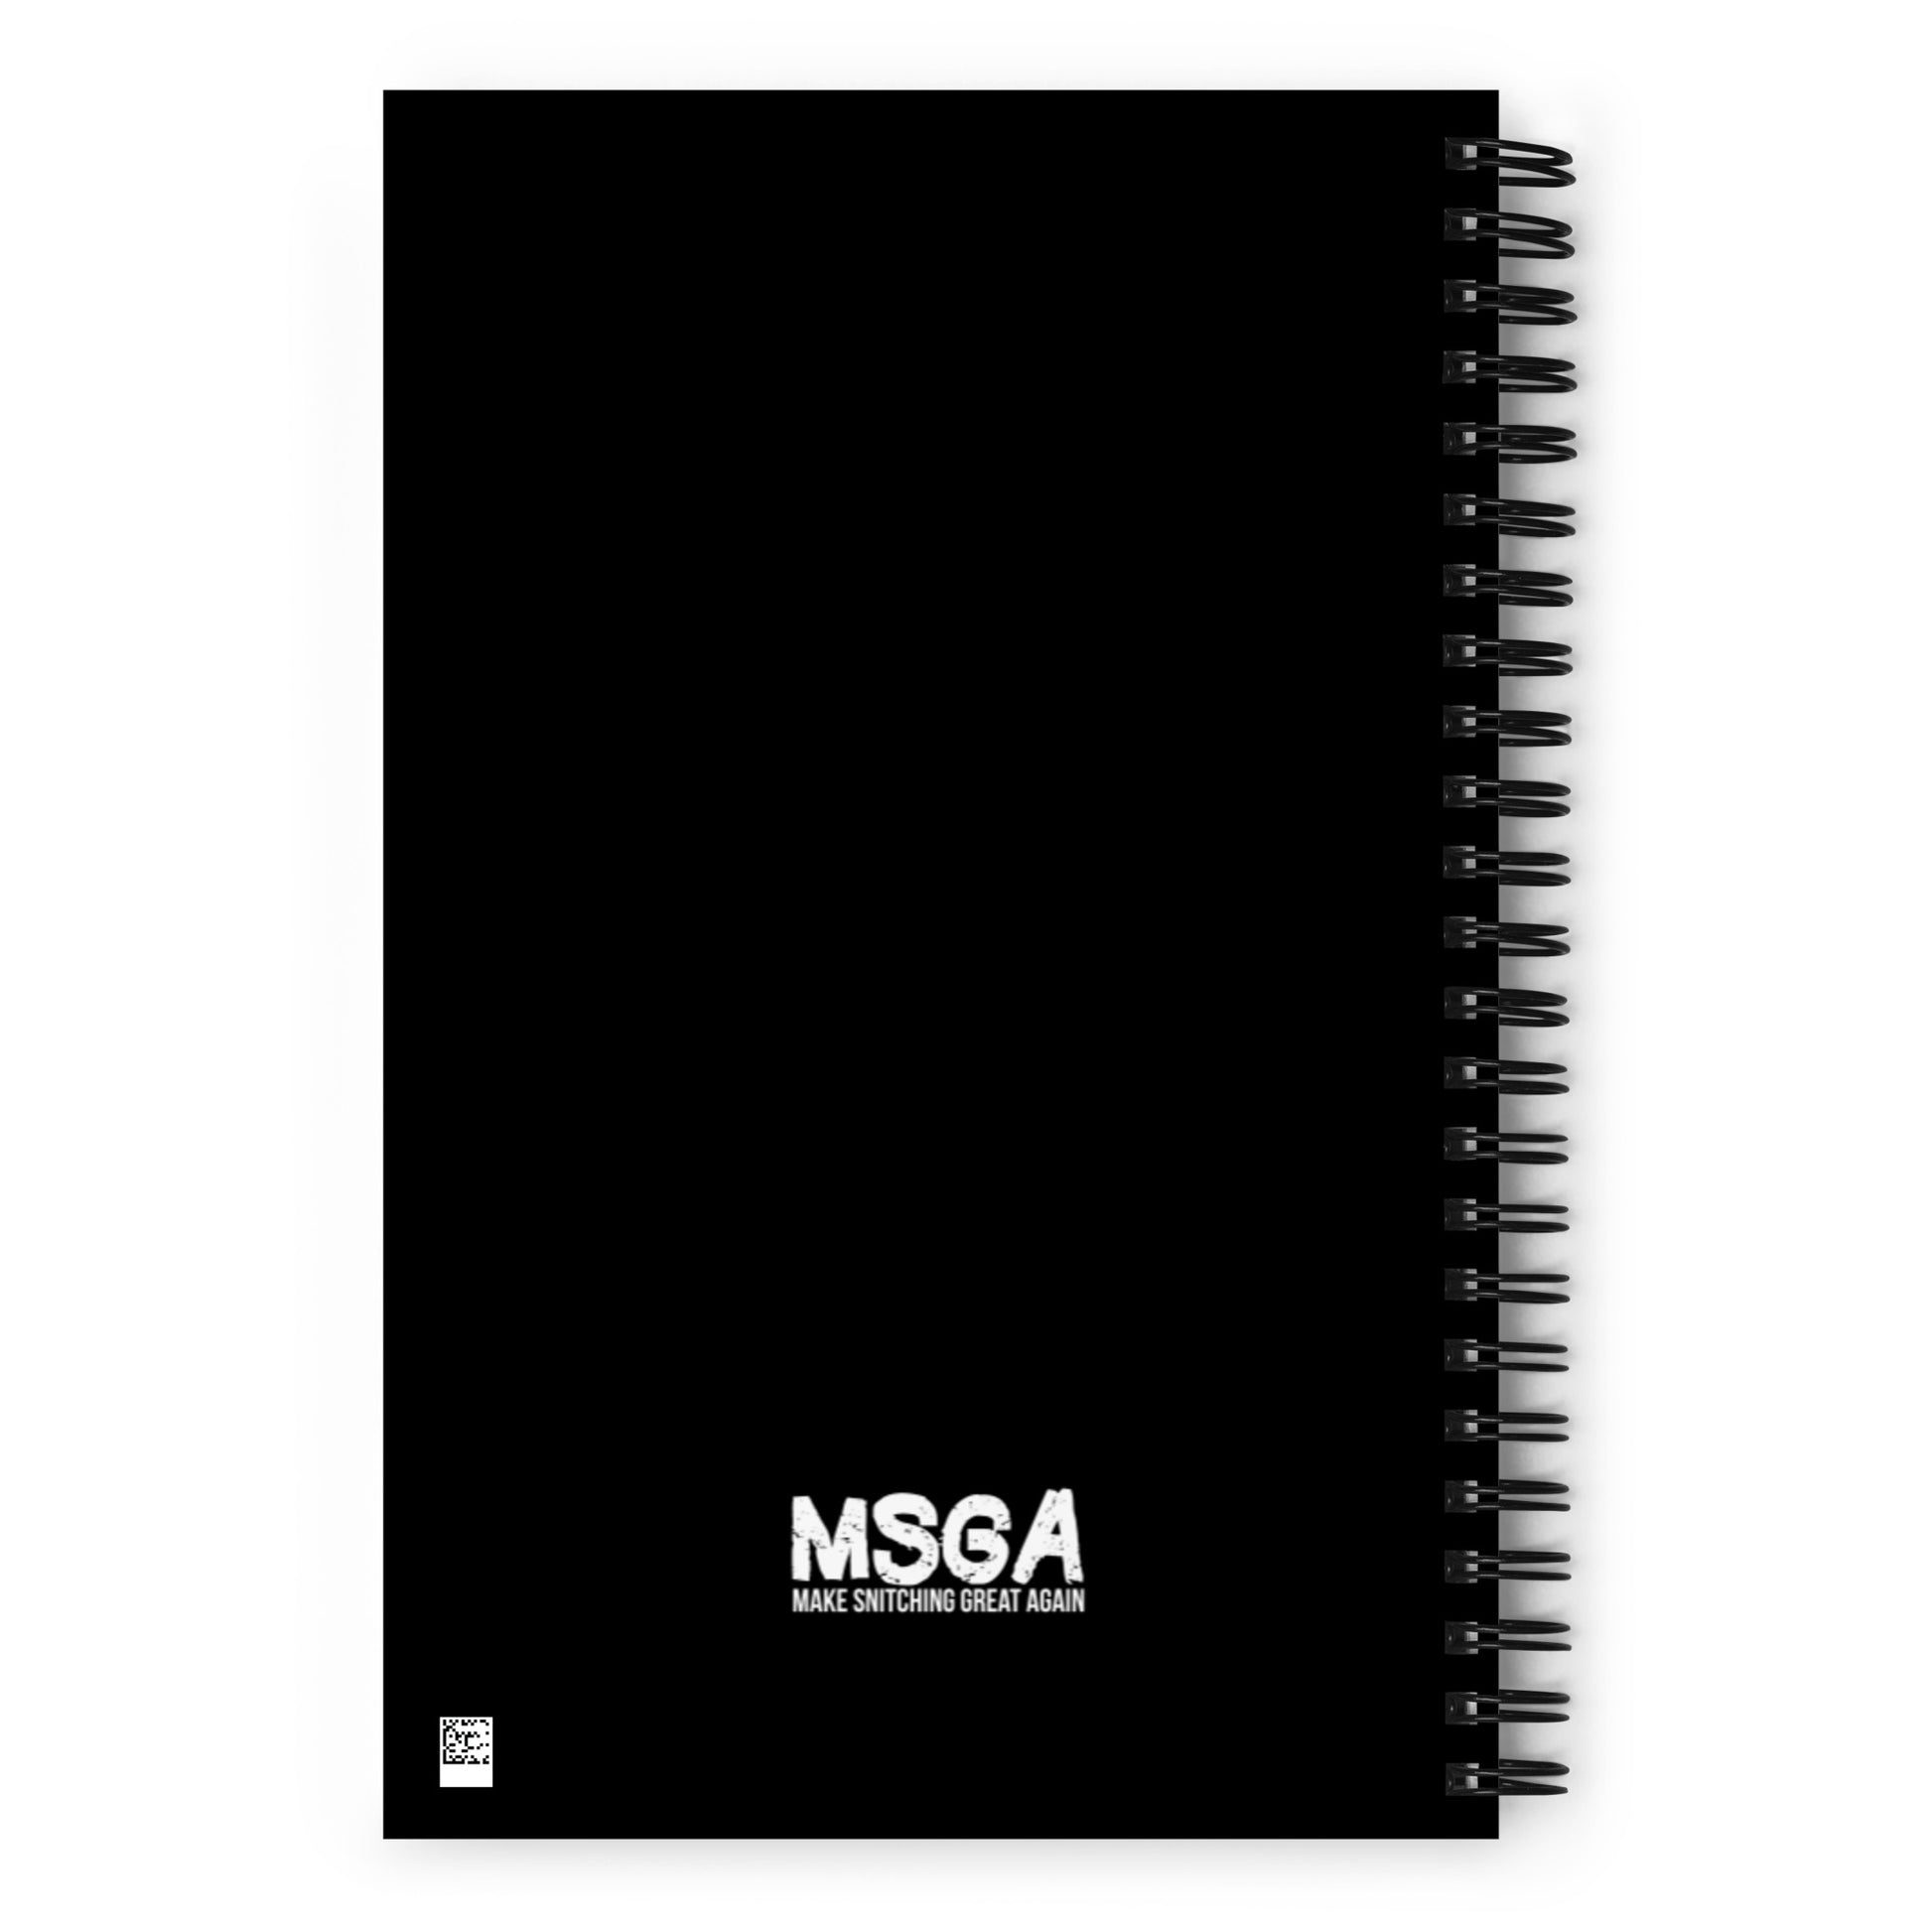 Make Snitching Great Again Spiral Notebook - Make Snitching Great Again